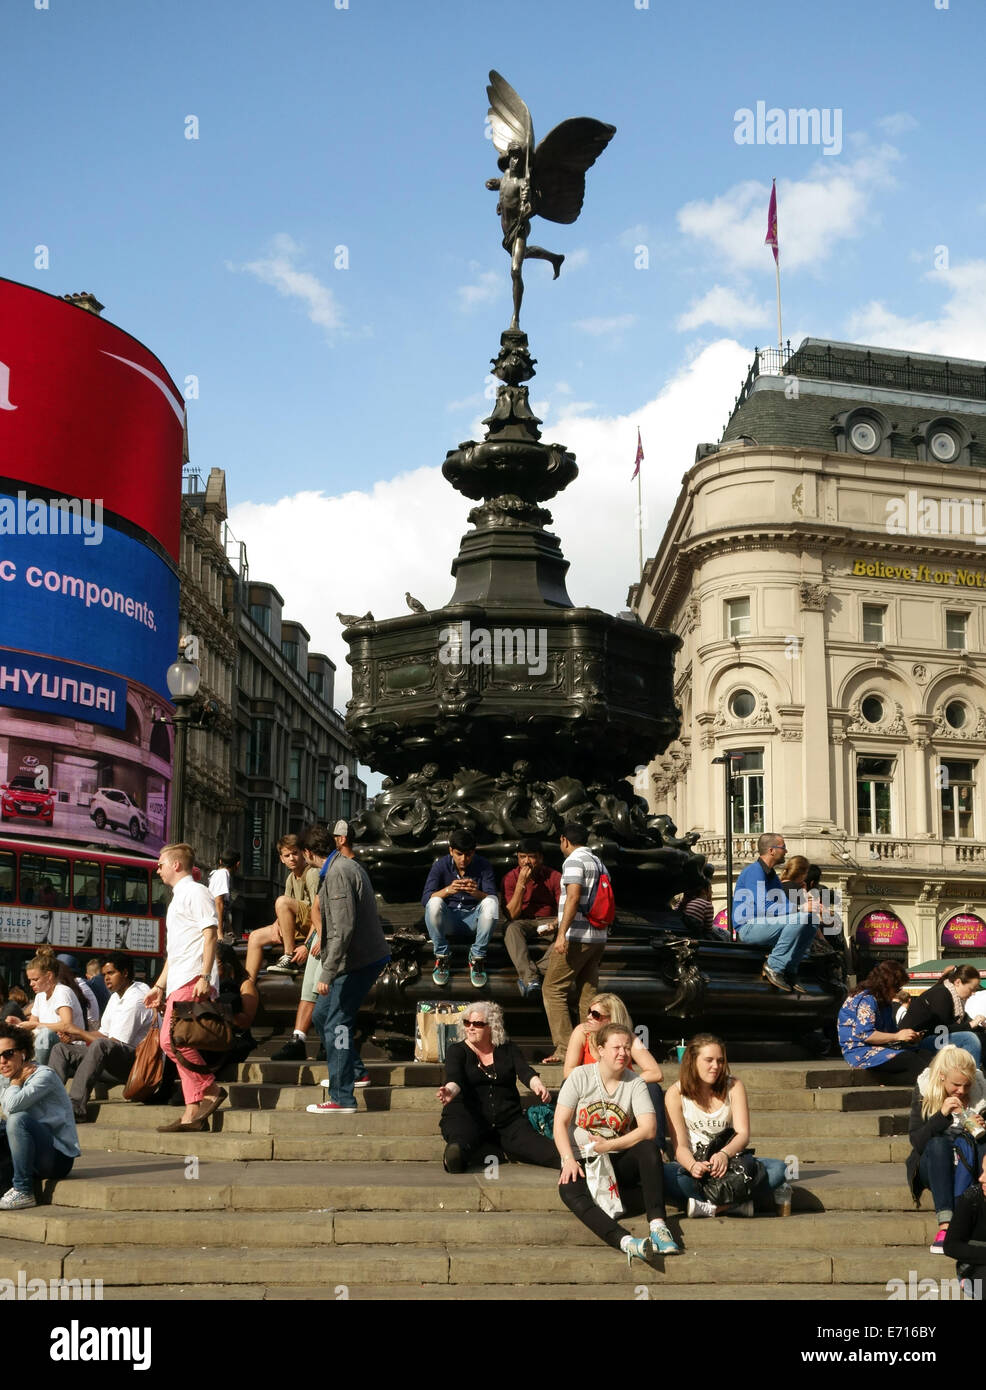 Tourists in Piccadilly Circus, London Stock Photo